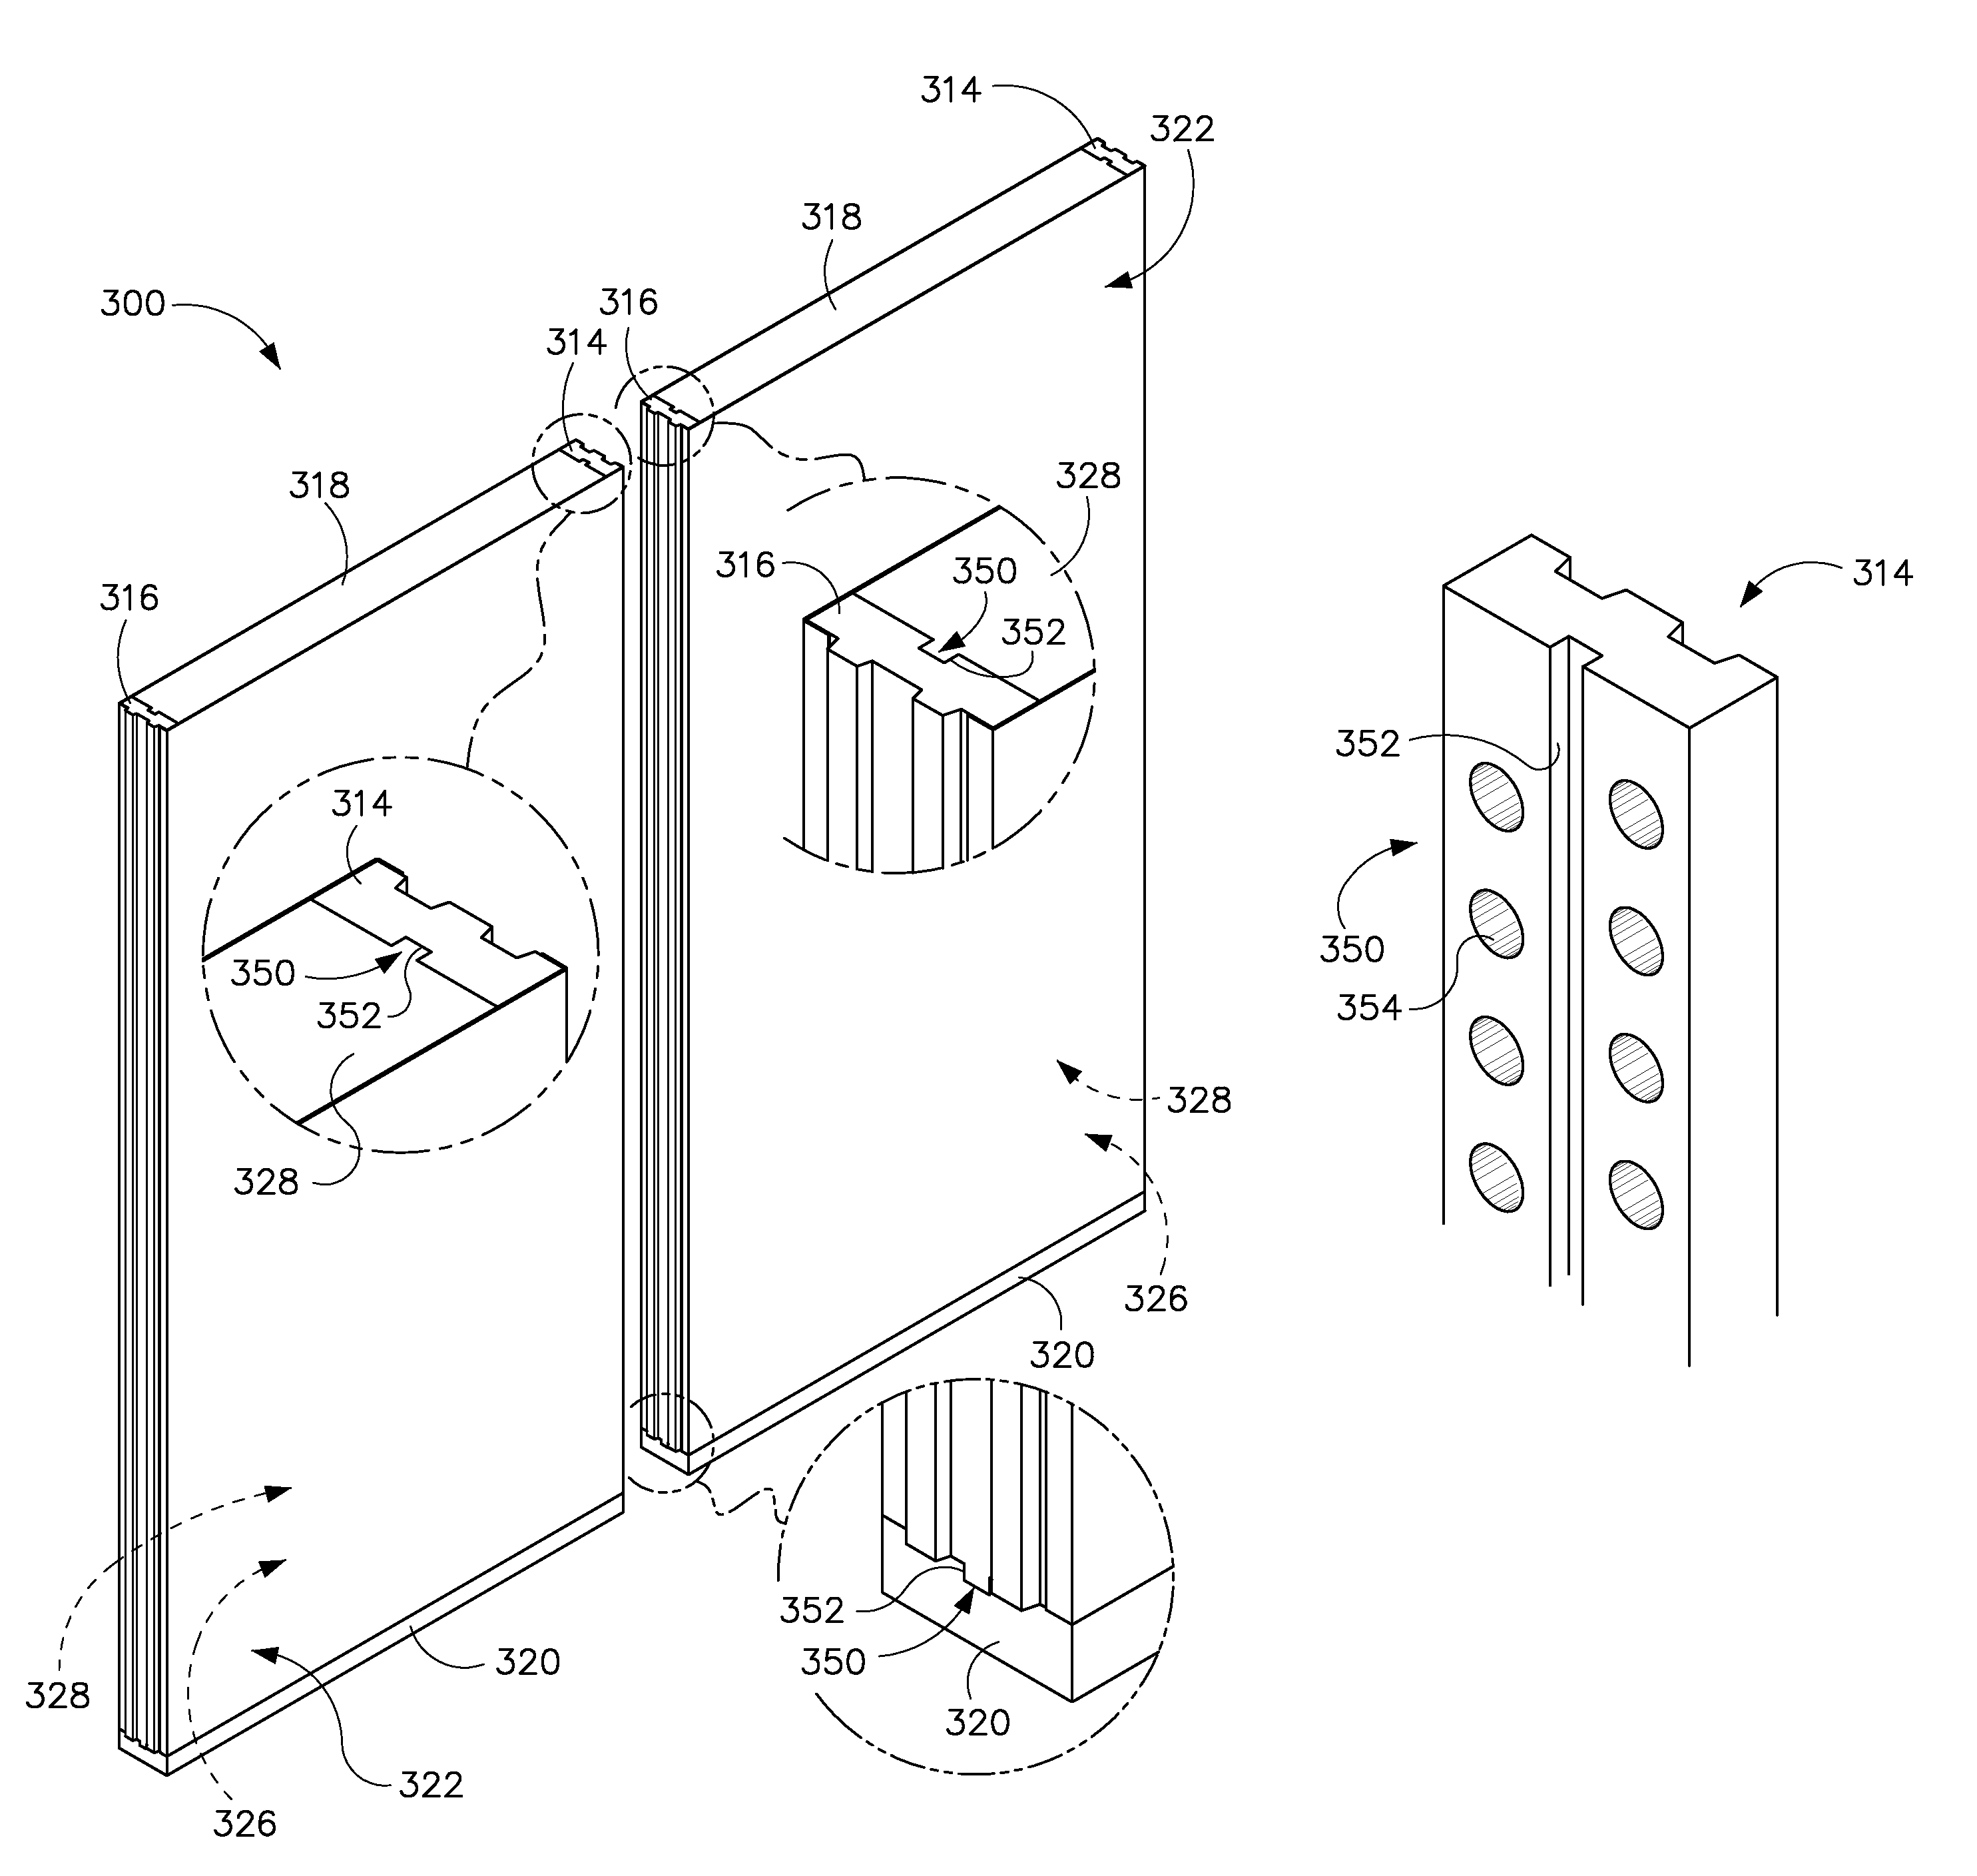 Structural insulated panel system